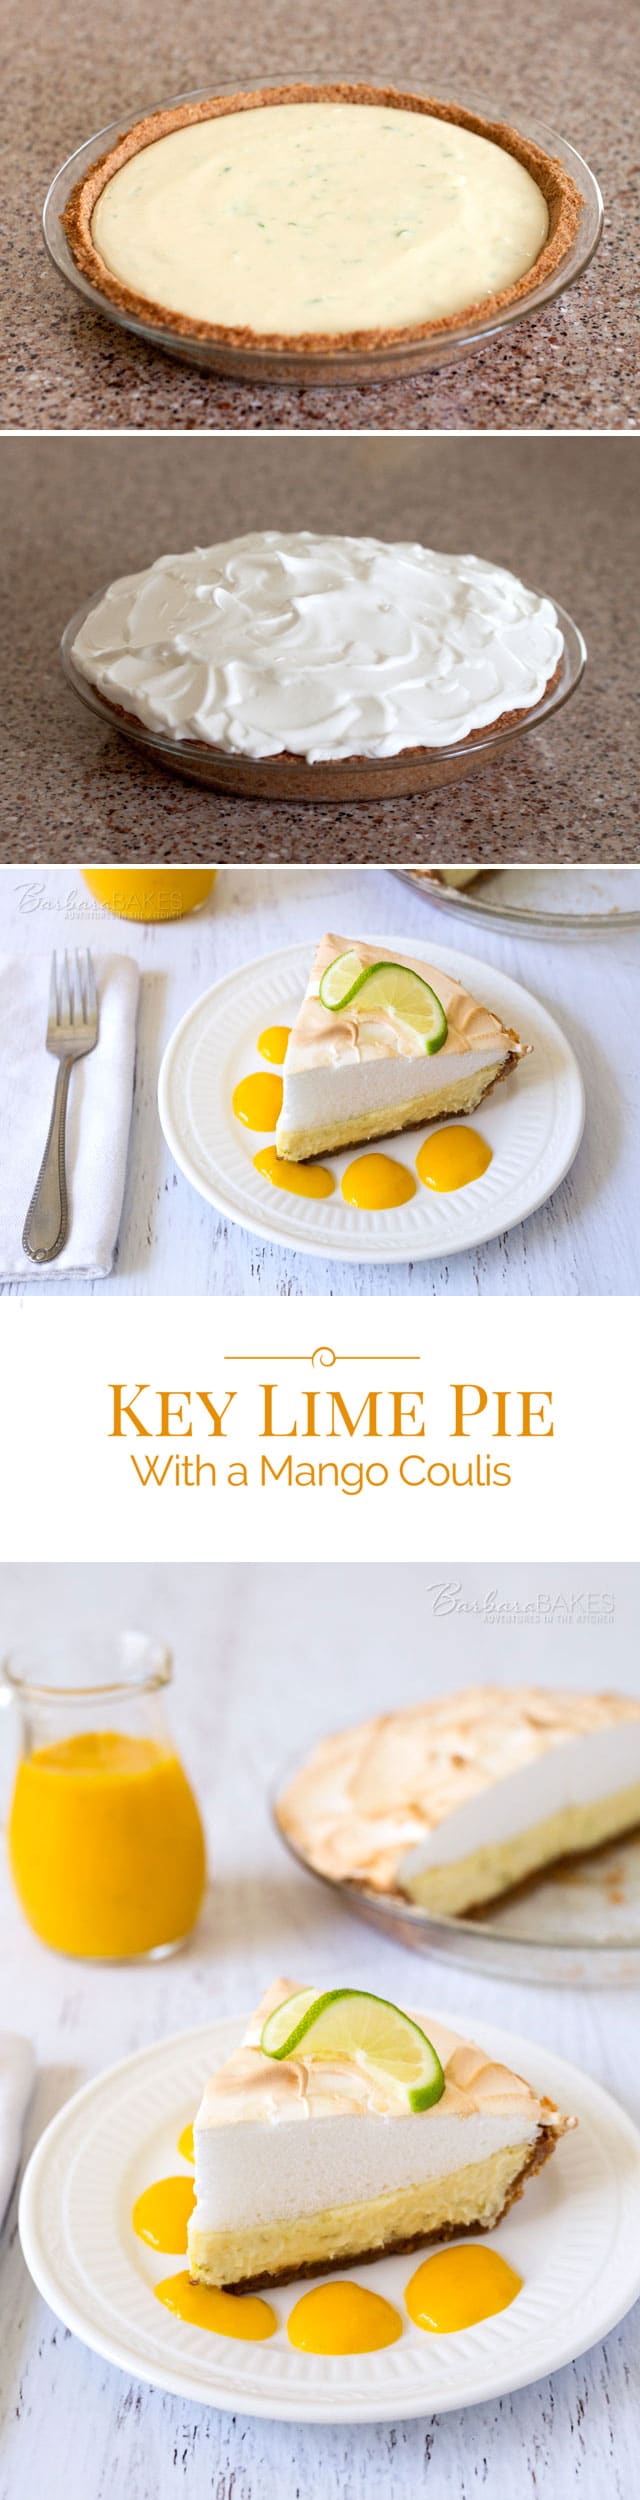 Key-Lime-Pie-With-Mango-Coulis-Collage-Barbara-Bakes